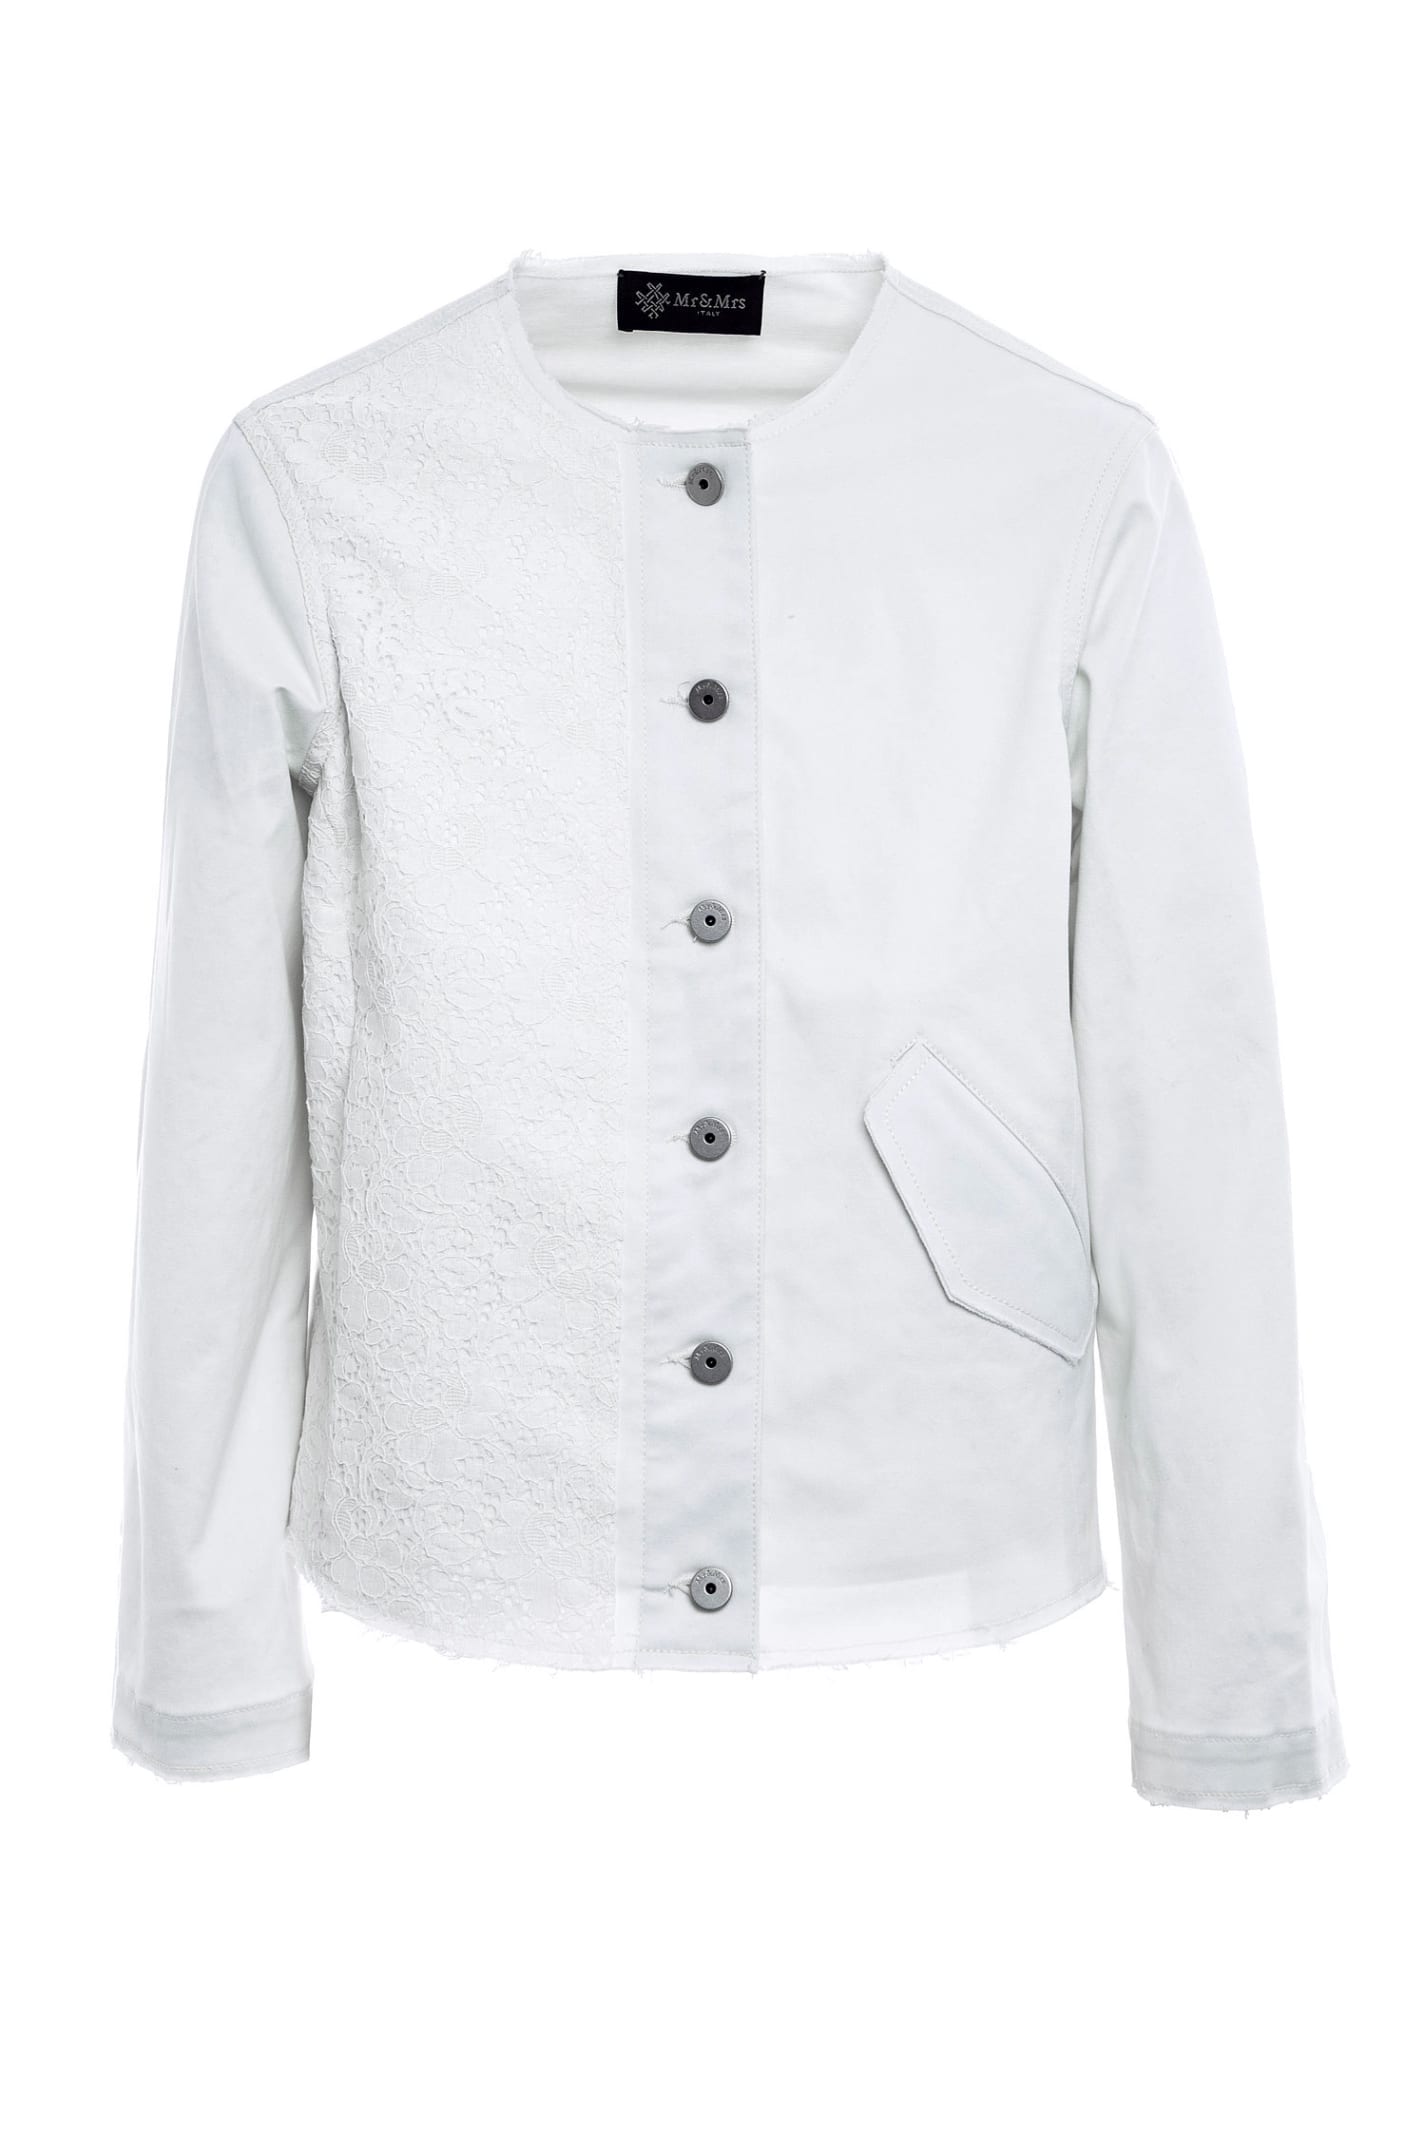 Mr & Mrs Italy Cottoncavalry Florealace White Jacket For Woman